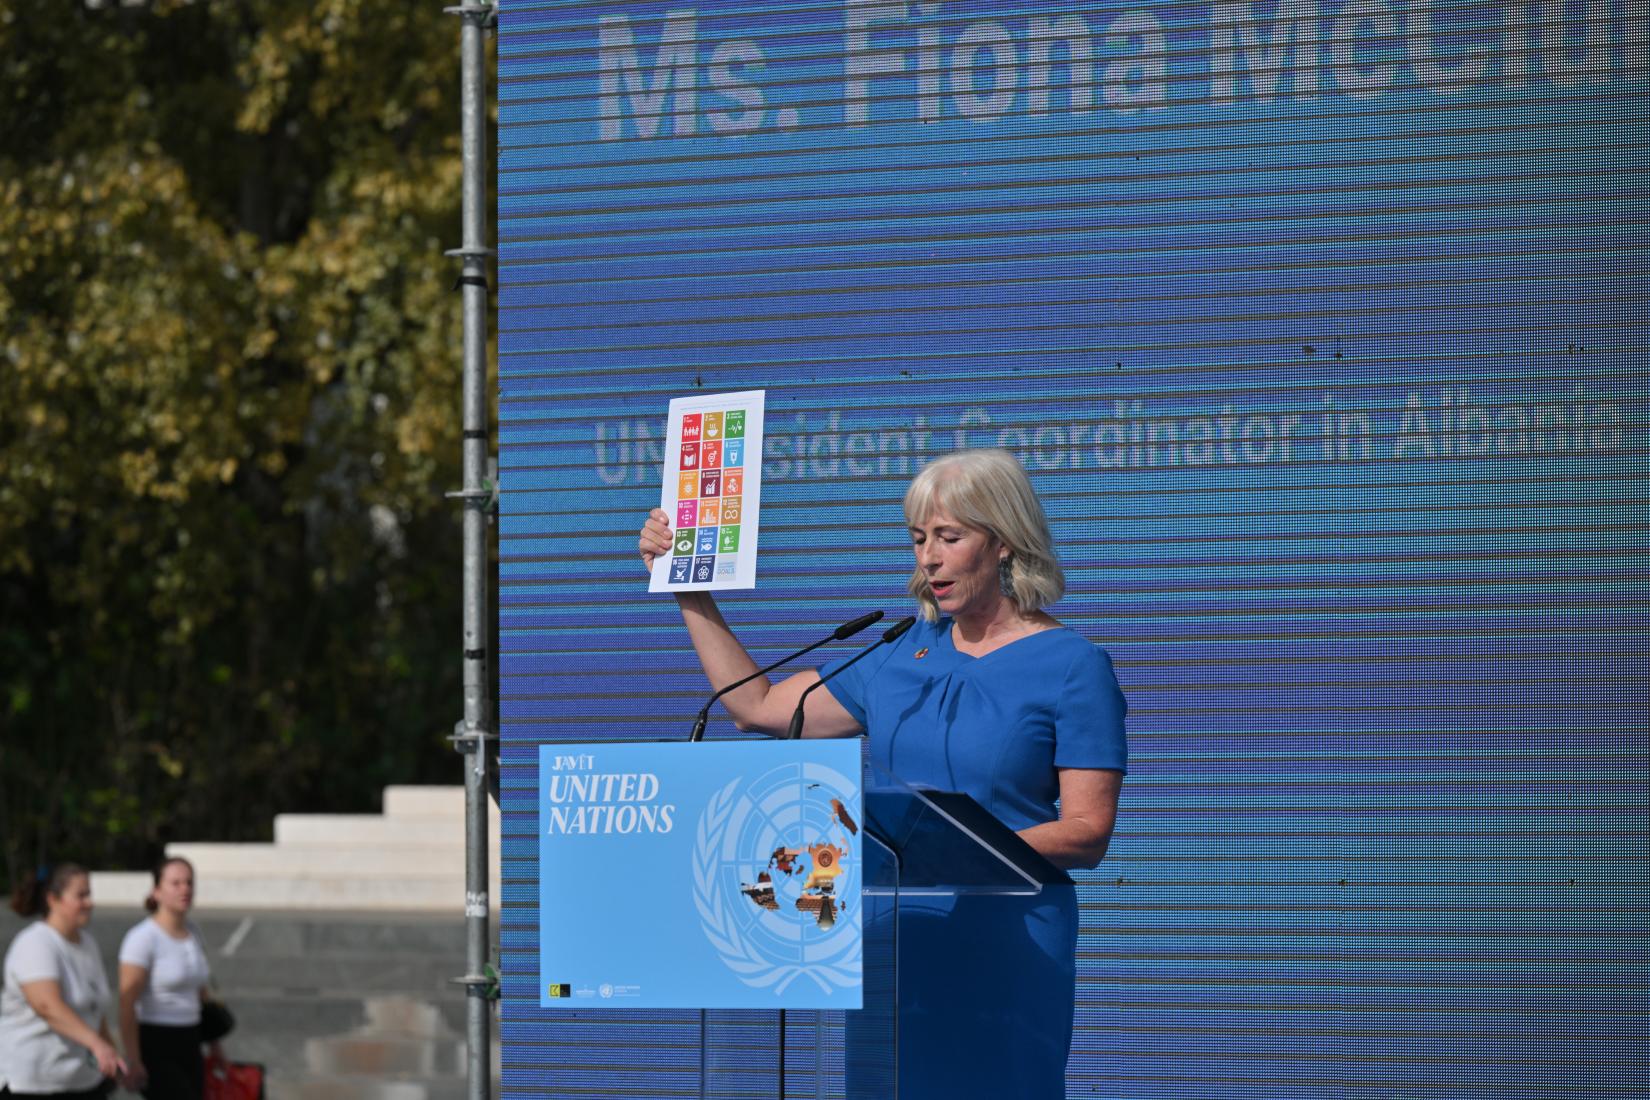 The UN Resident Coordinator in Albania, Ms. Fiona McCluney, giving a speech during the High-Level Commemorative event on UN Day.